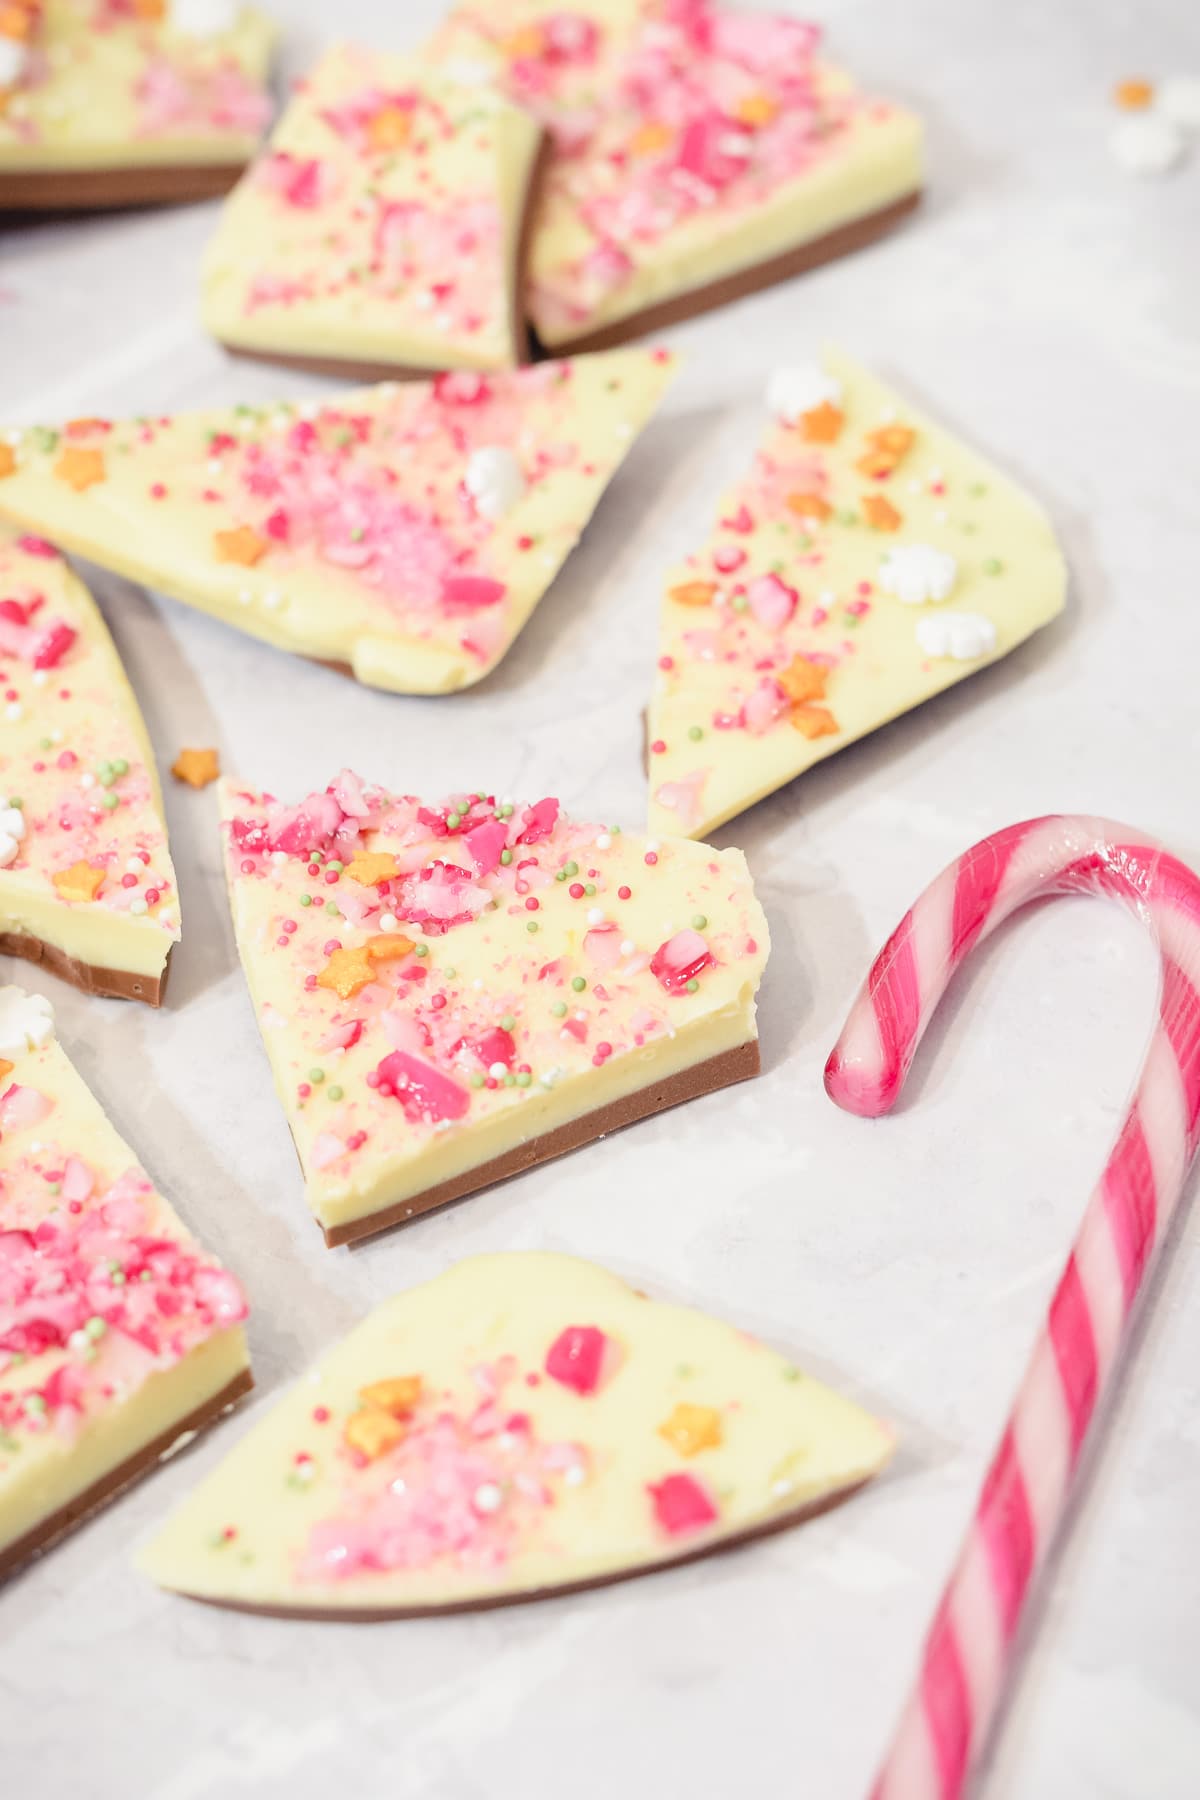 White chocolate peppermint Christmas bark pieces spread out with a candy cane